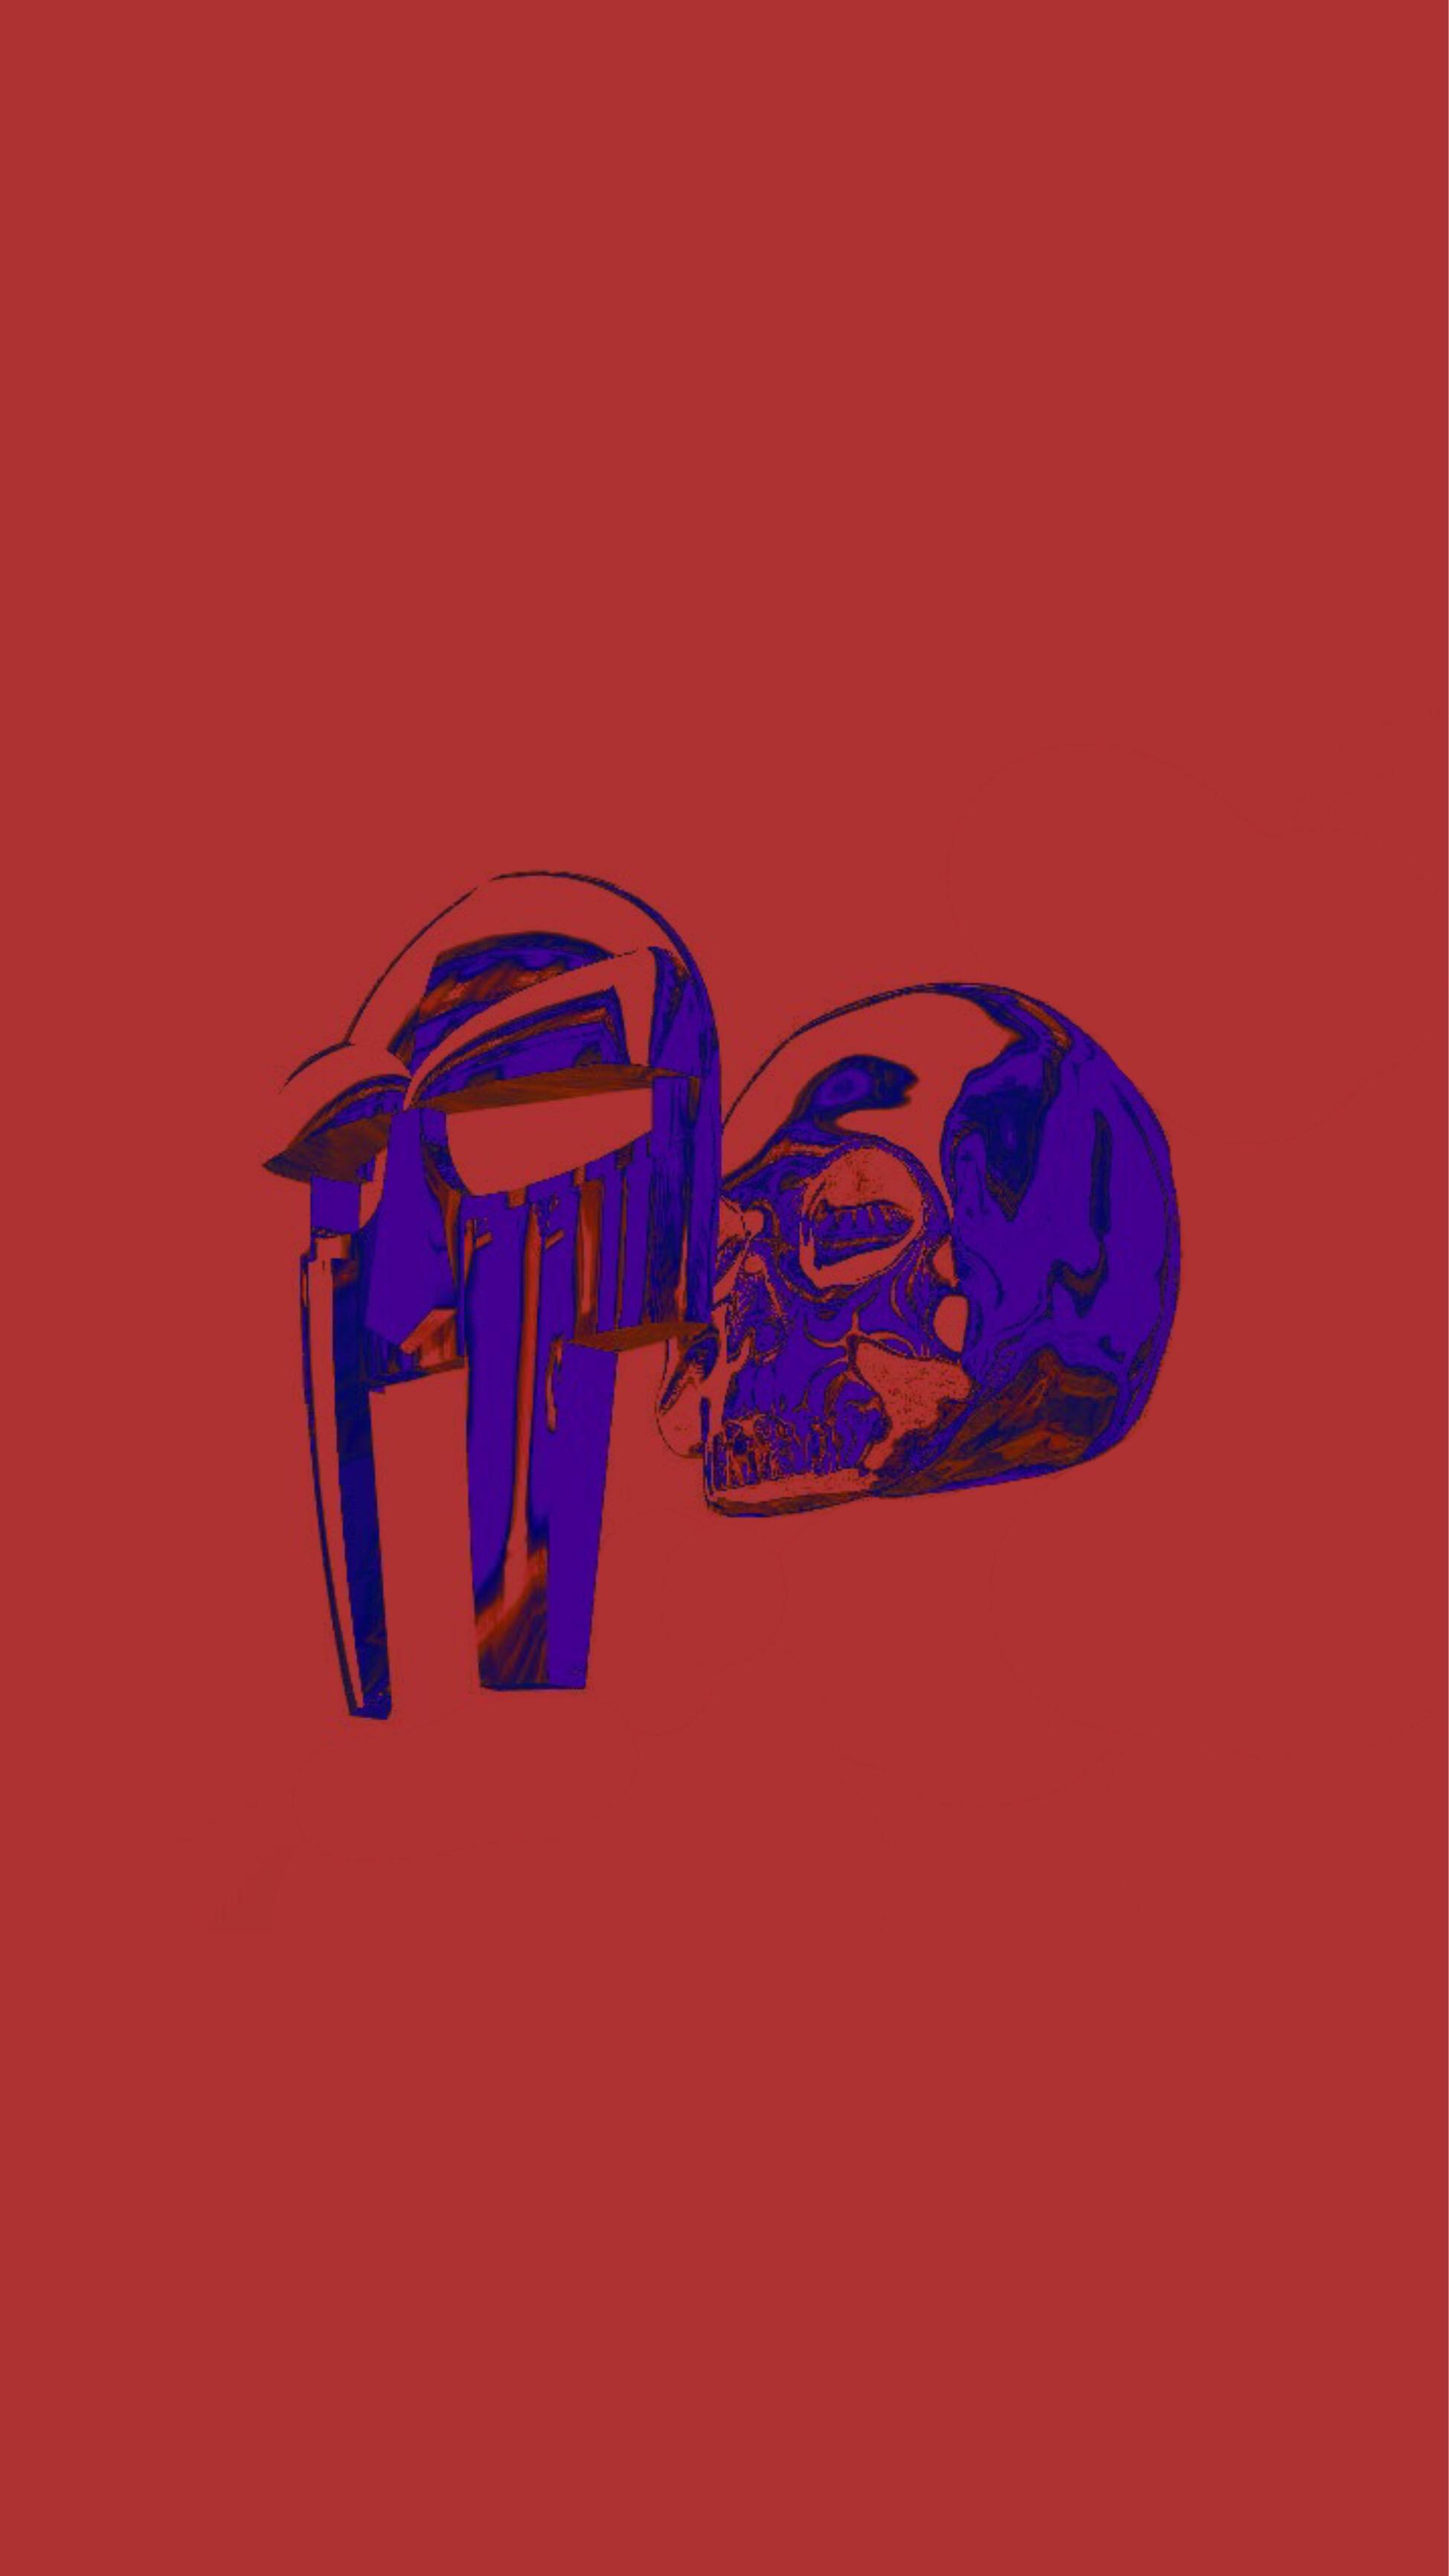 Mf doom Wallpaper phone  Mf doom Cool wallpapers for phones Dont touch  my phone wallpapers